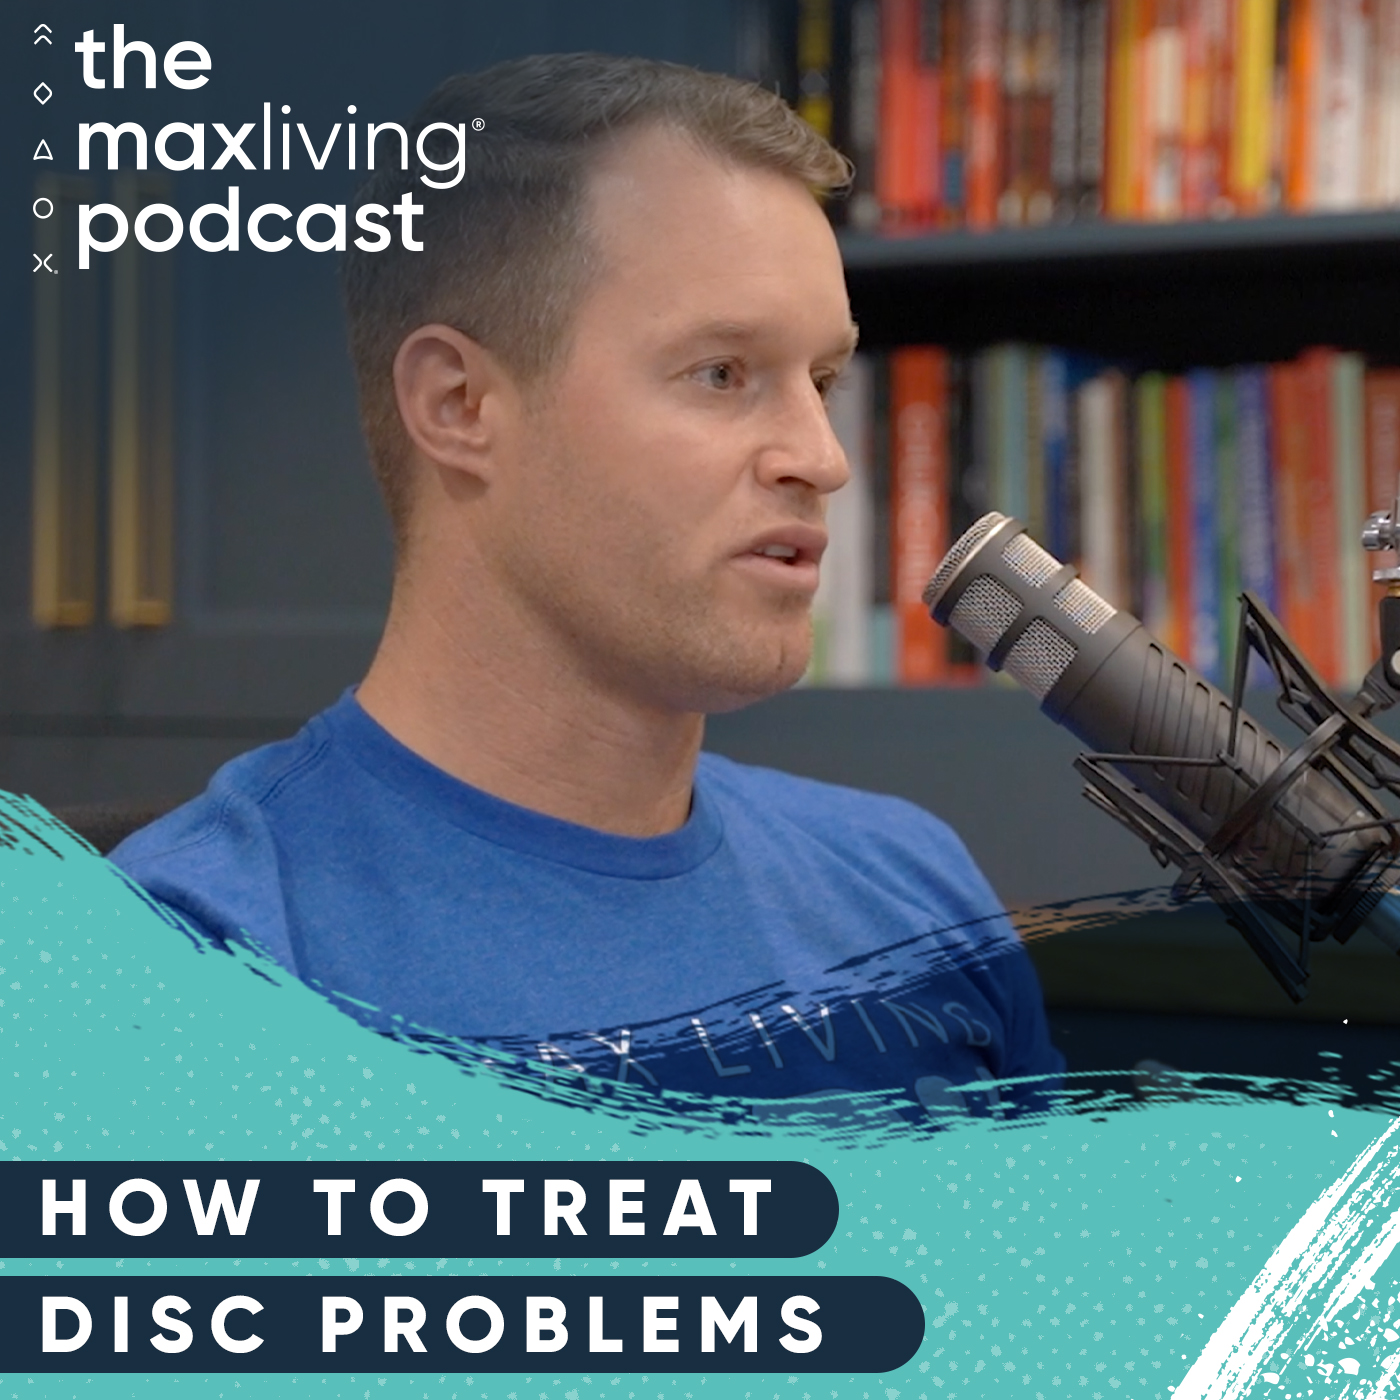 Episode 43 - How to Treat Disc Problems